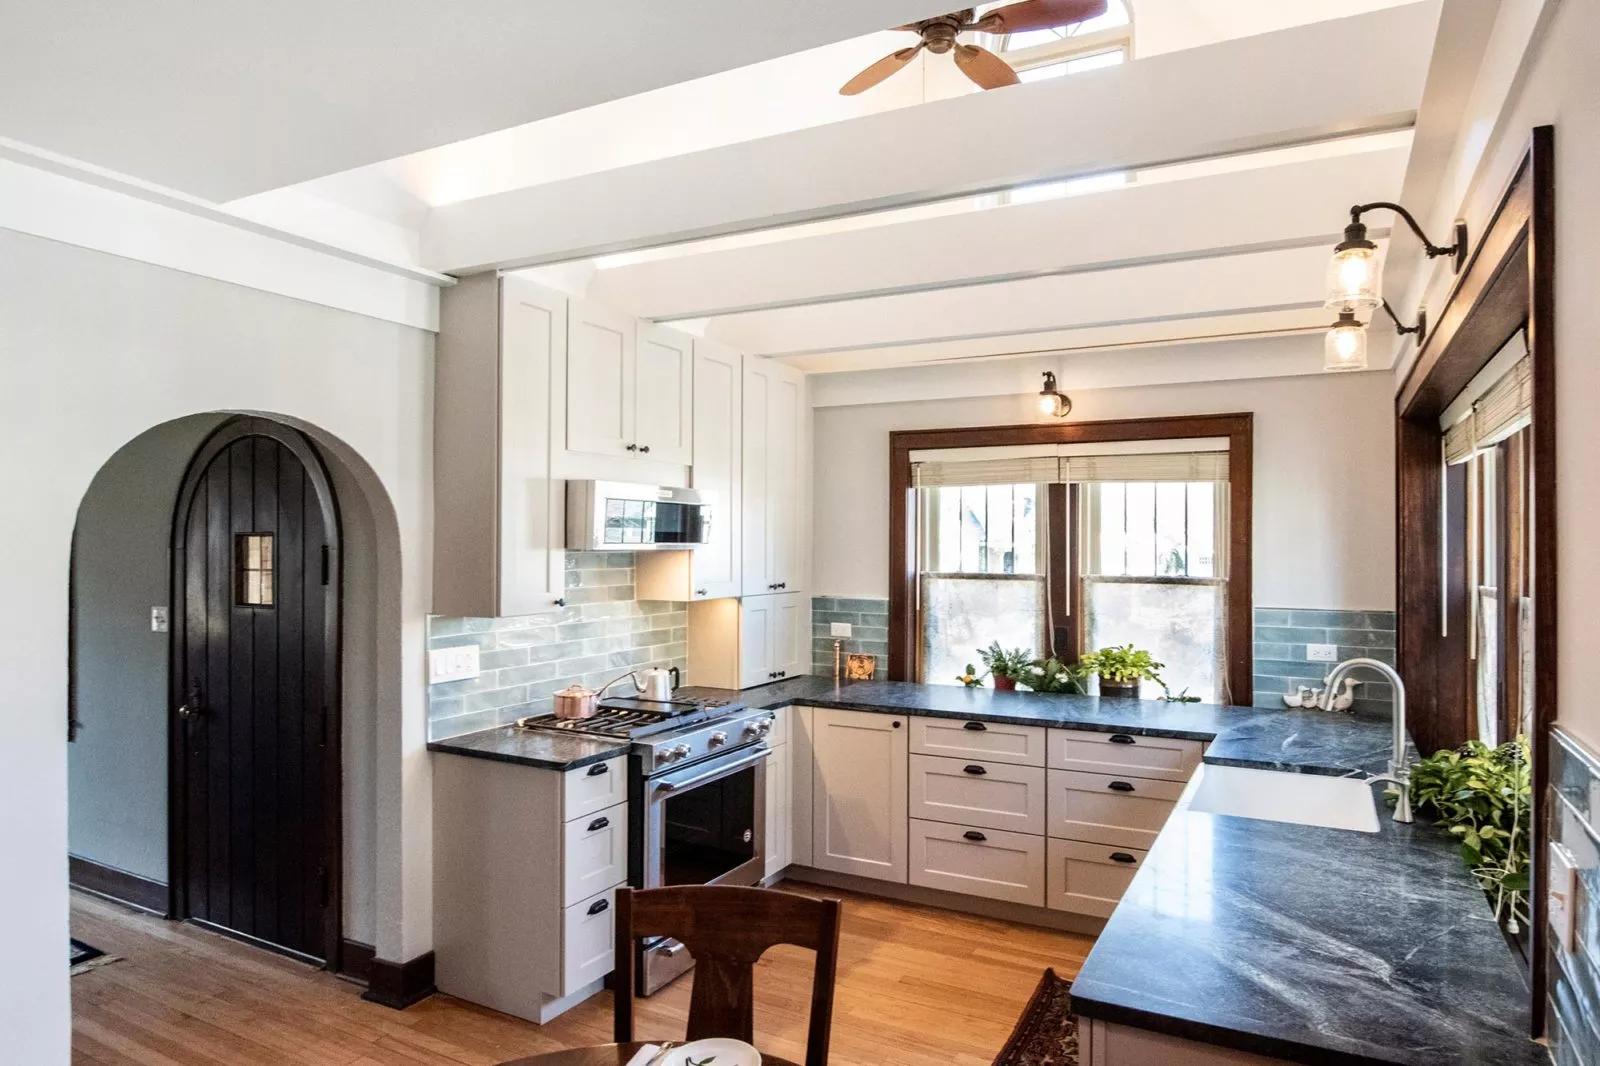 kitchen renovation traditional home black quarts countertops white exposed ceiling beams